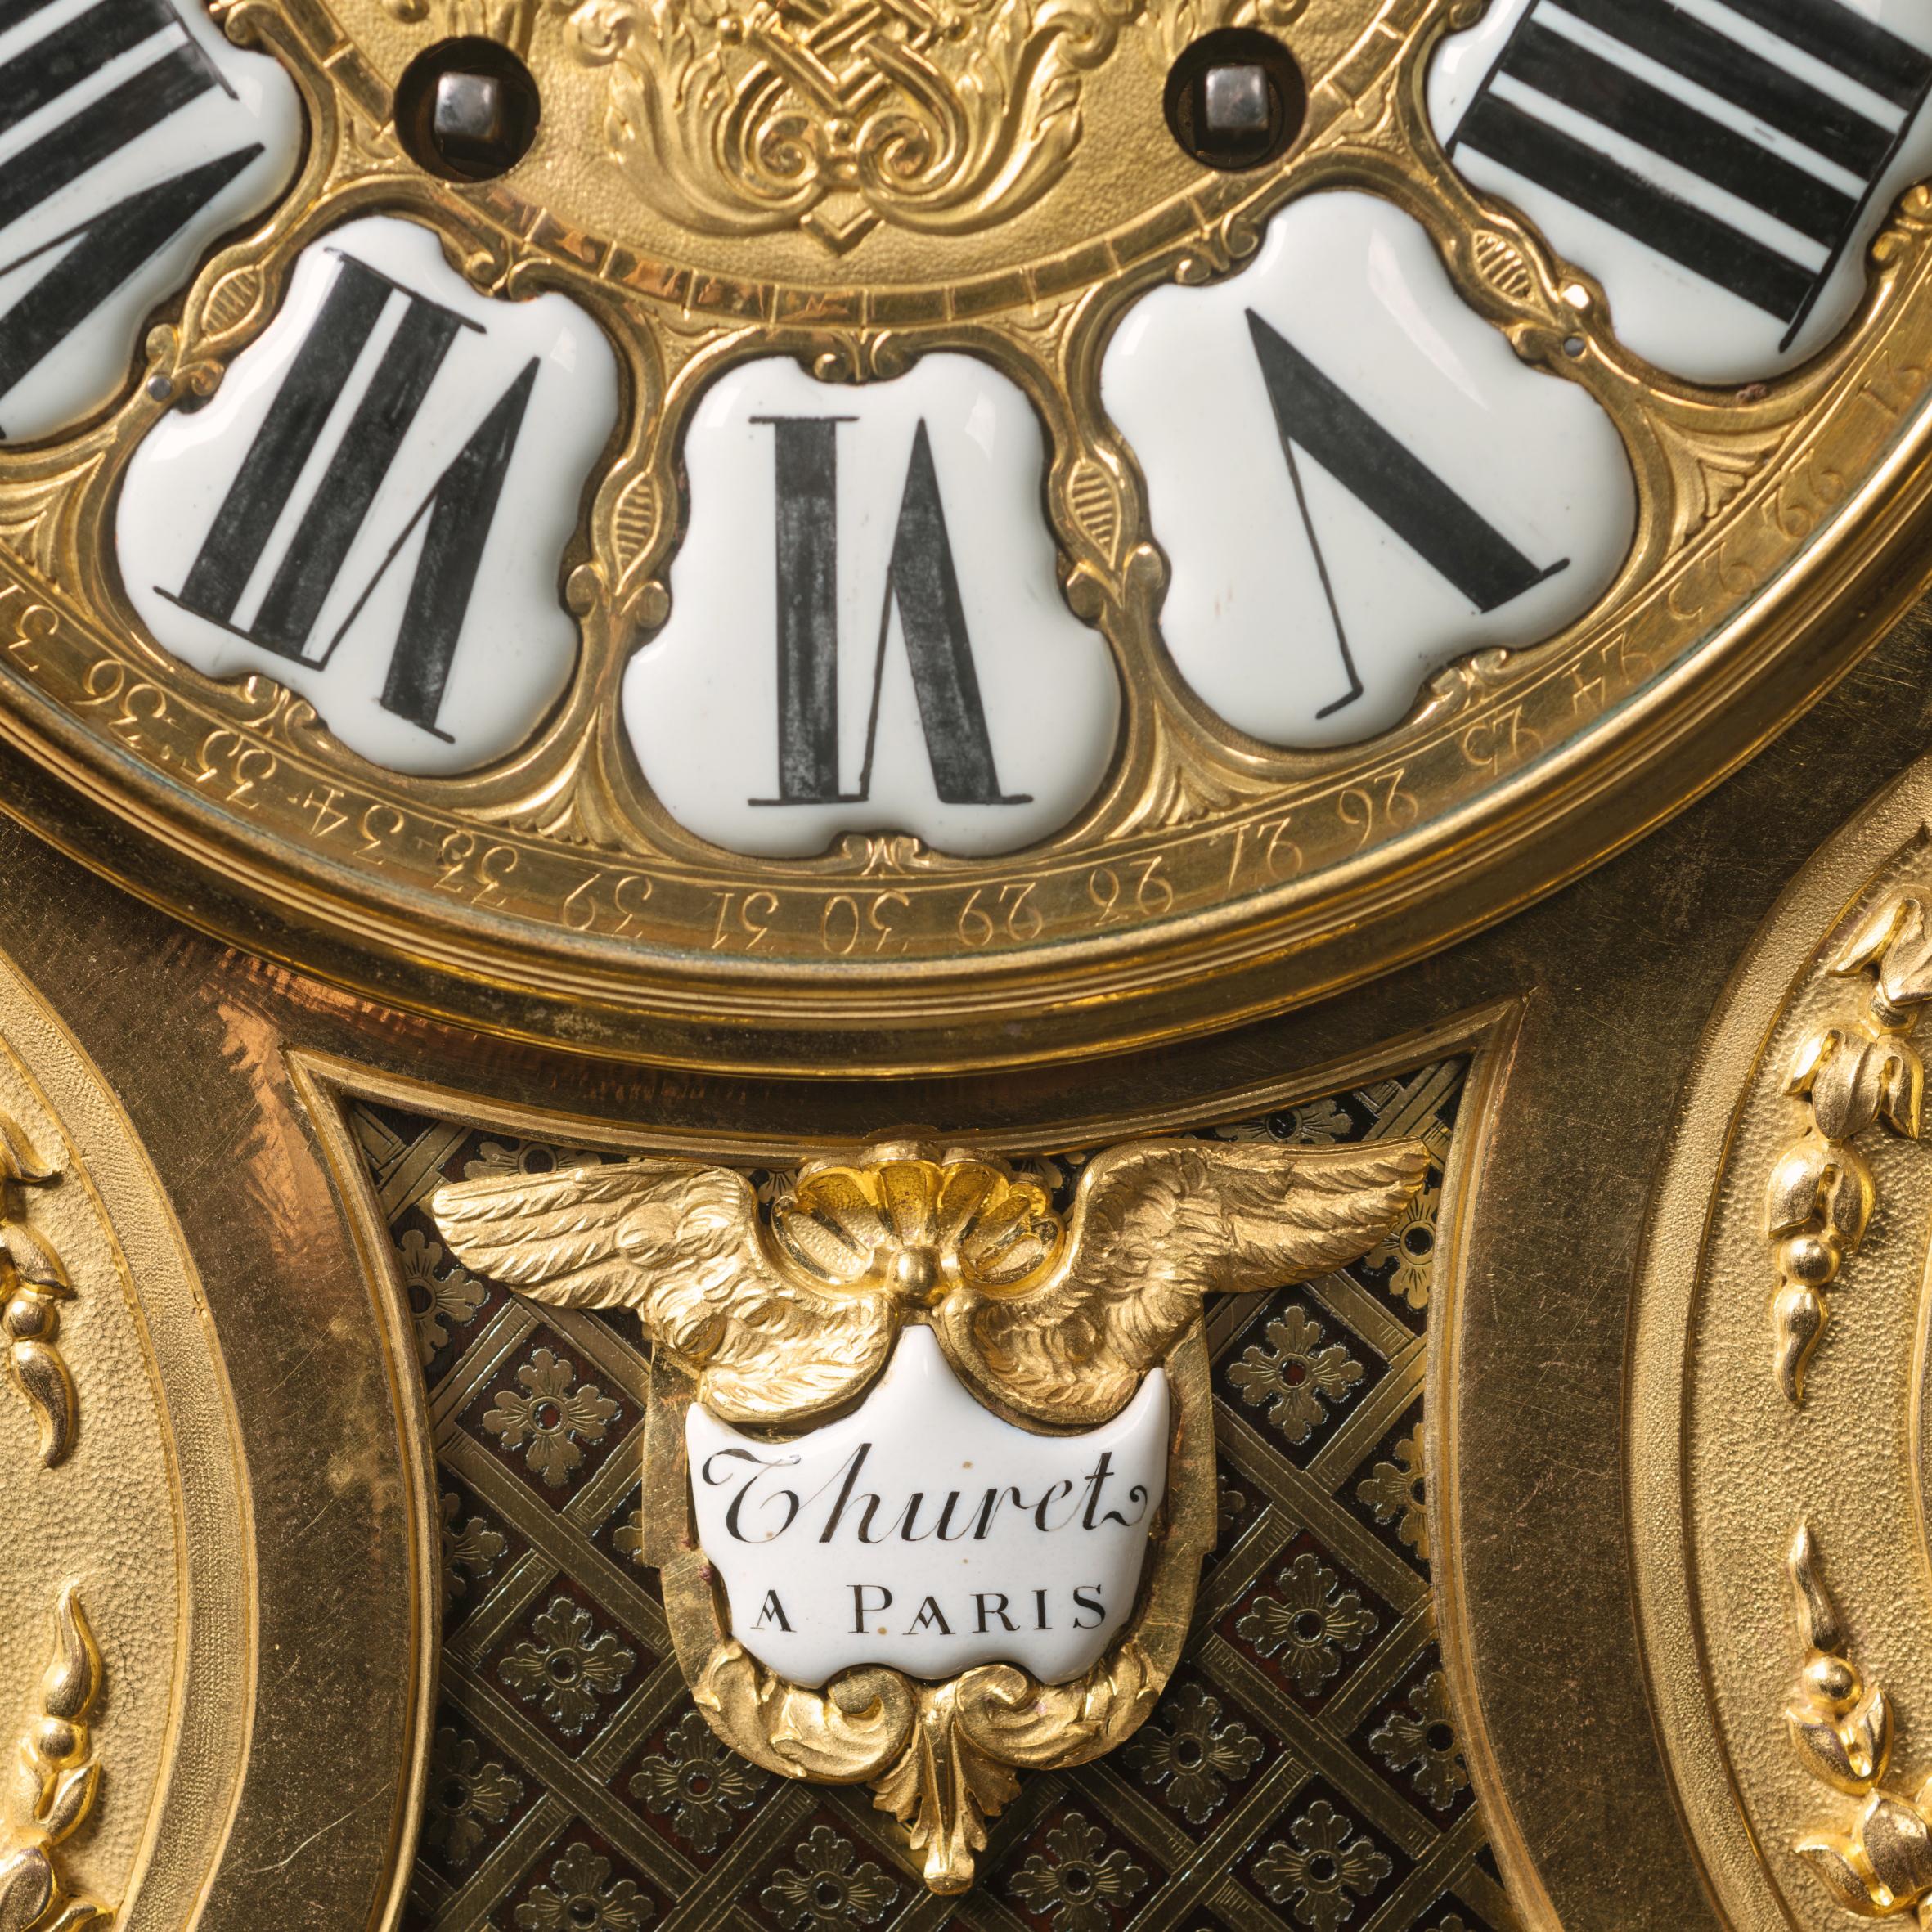 A Regence Style Grand Cartel de Applique In the Manner of André-Charles Boulle For Sale 2